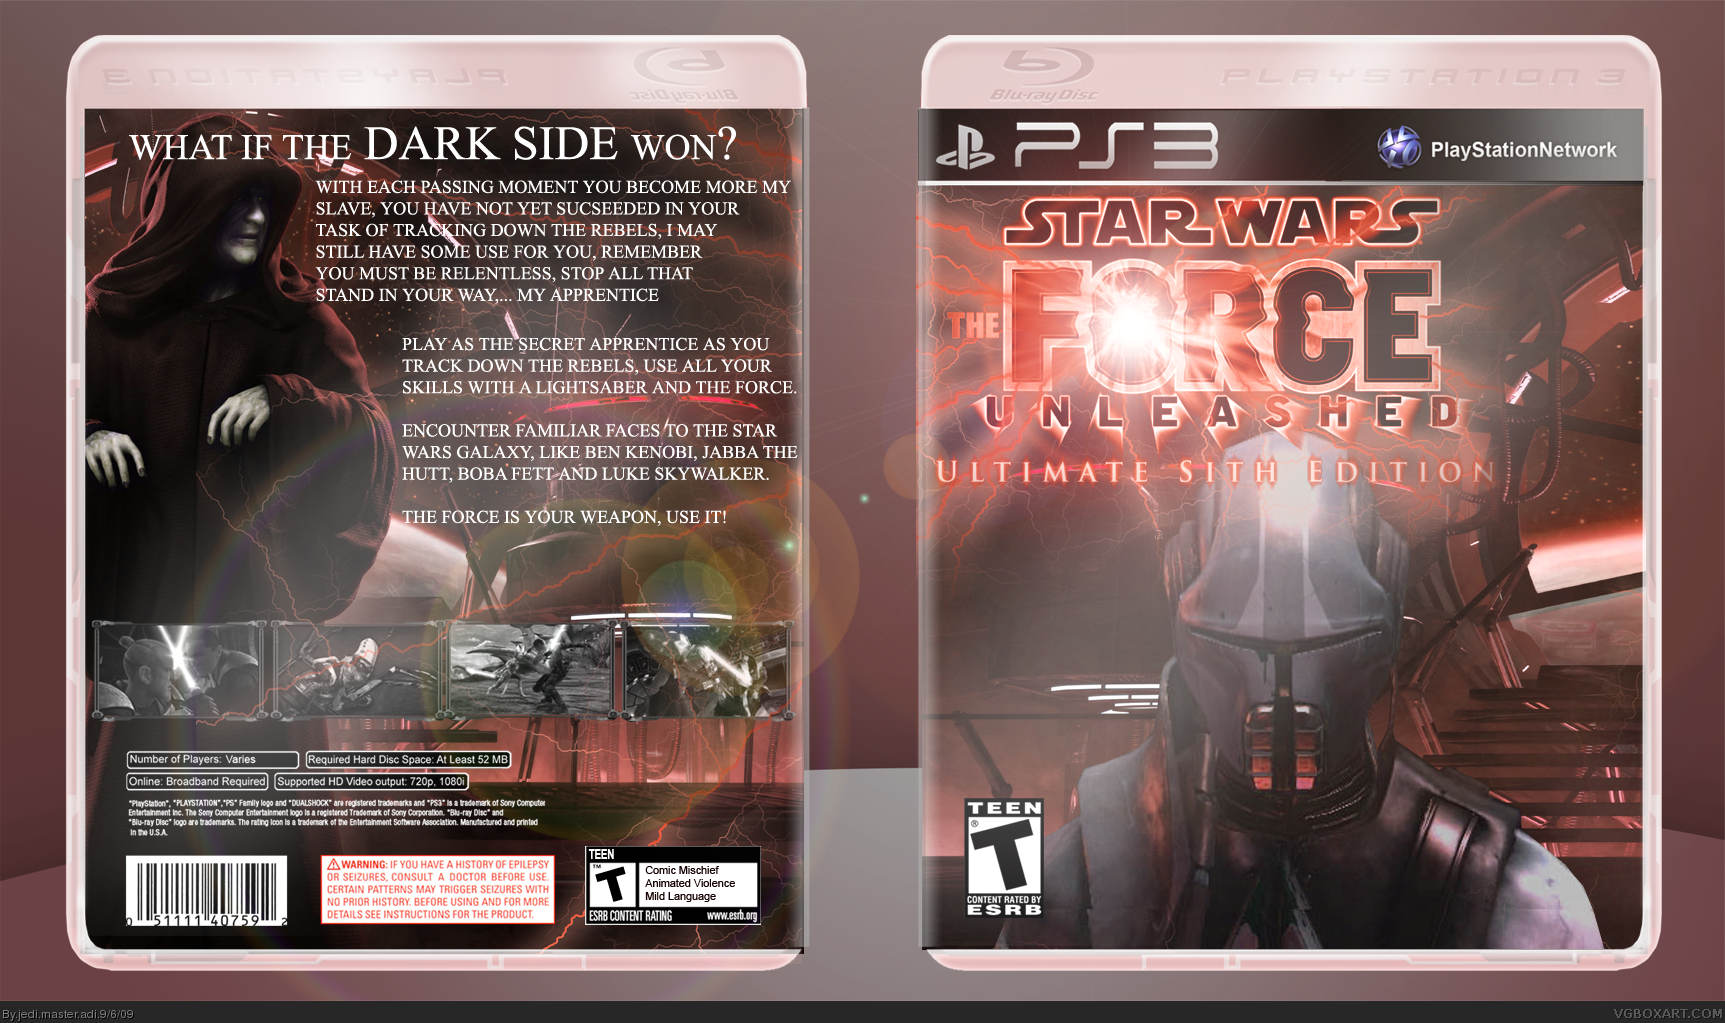 Star Wars: The Force Unleashed Sith Edition box cover